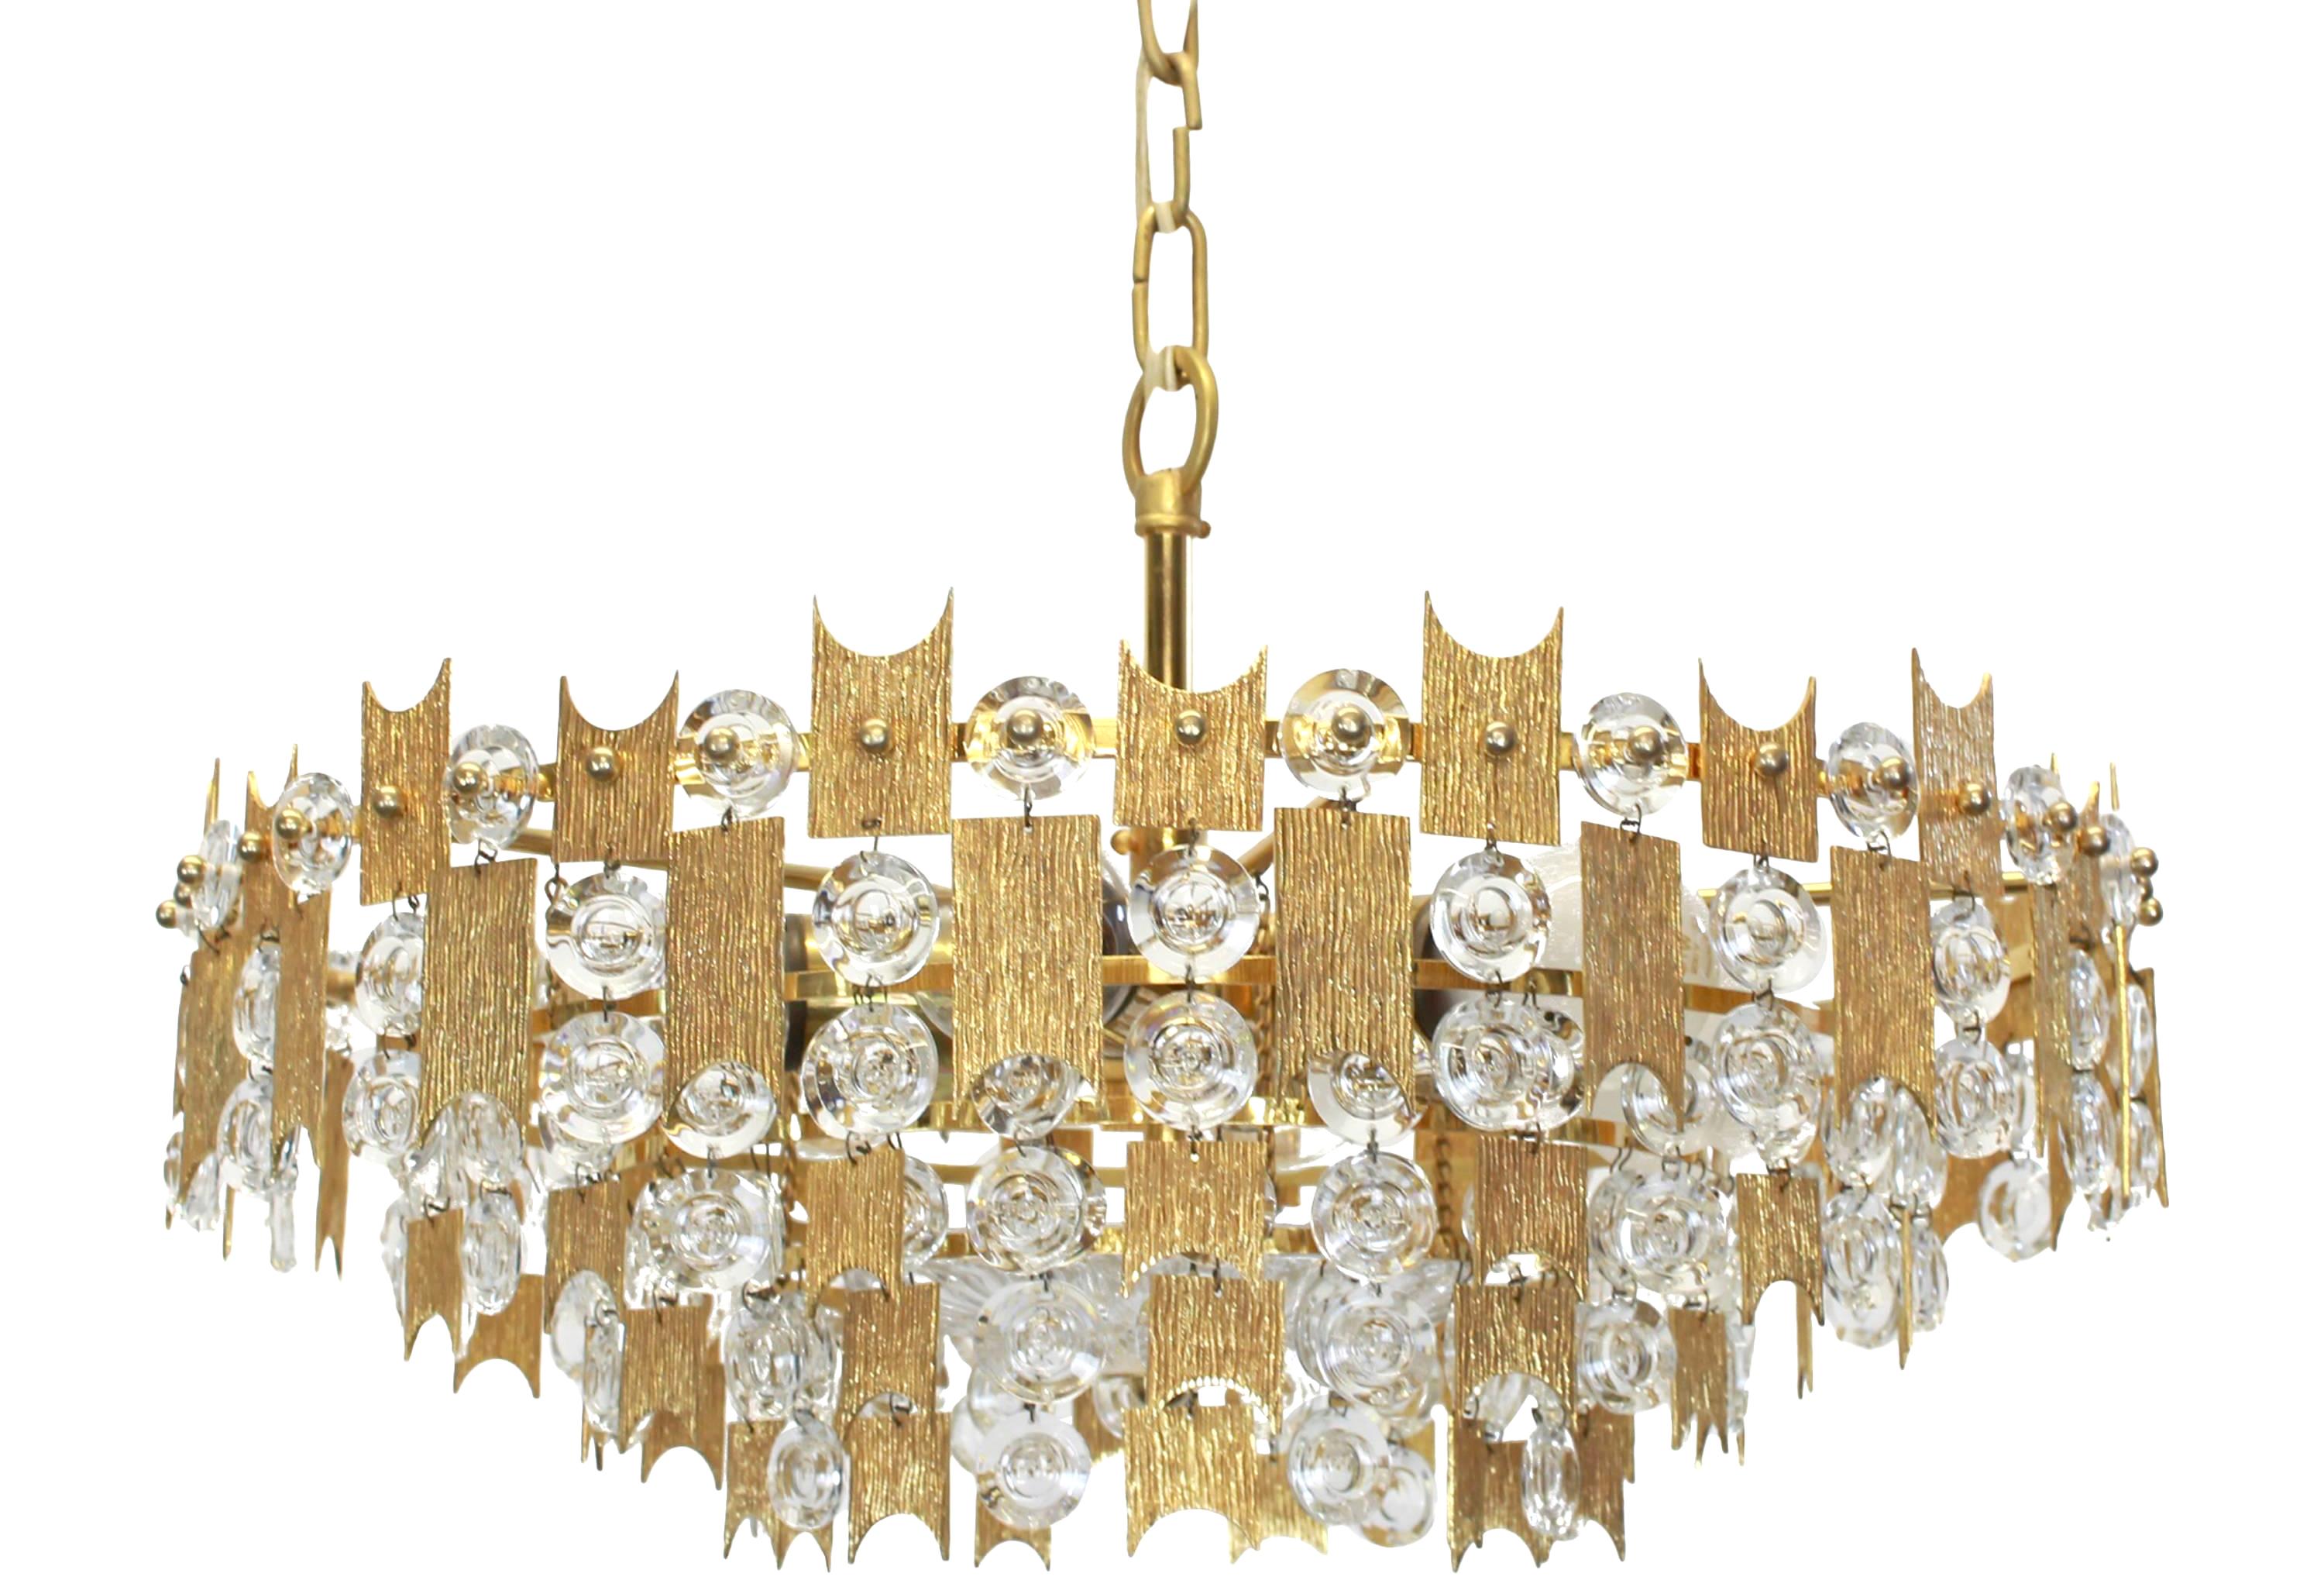 1 of 2 stunning chandeliers by Palwa (Palme and Walter), Germany, manufactured in the 1960s. Each chandelier is composed of jewel-like glass pieces and brass plates with a Brutalist relief.

Sockets: It needs six x E27 standard bulbs to